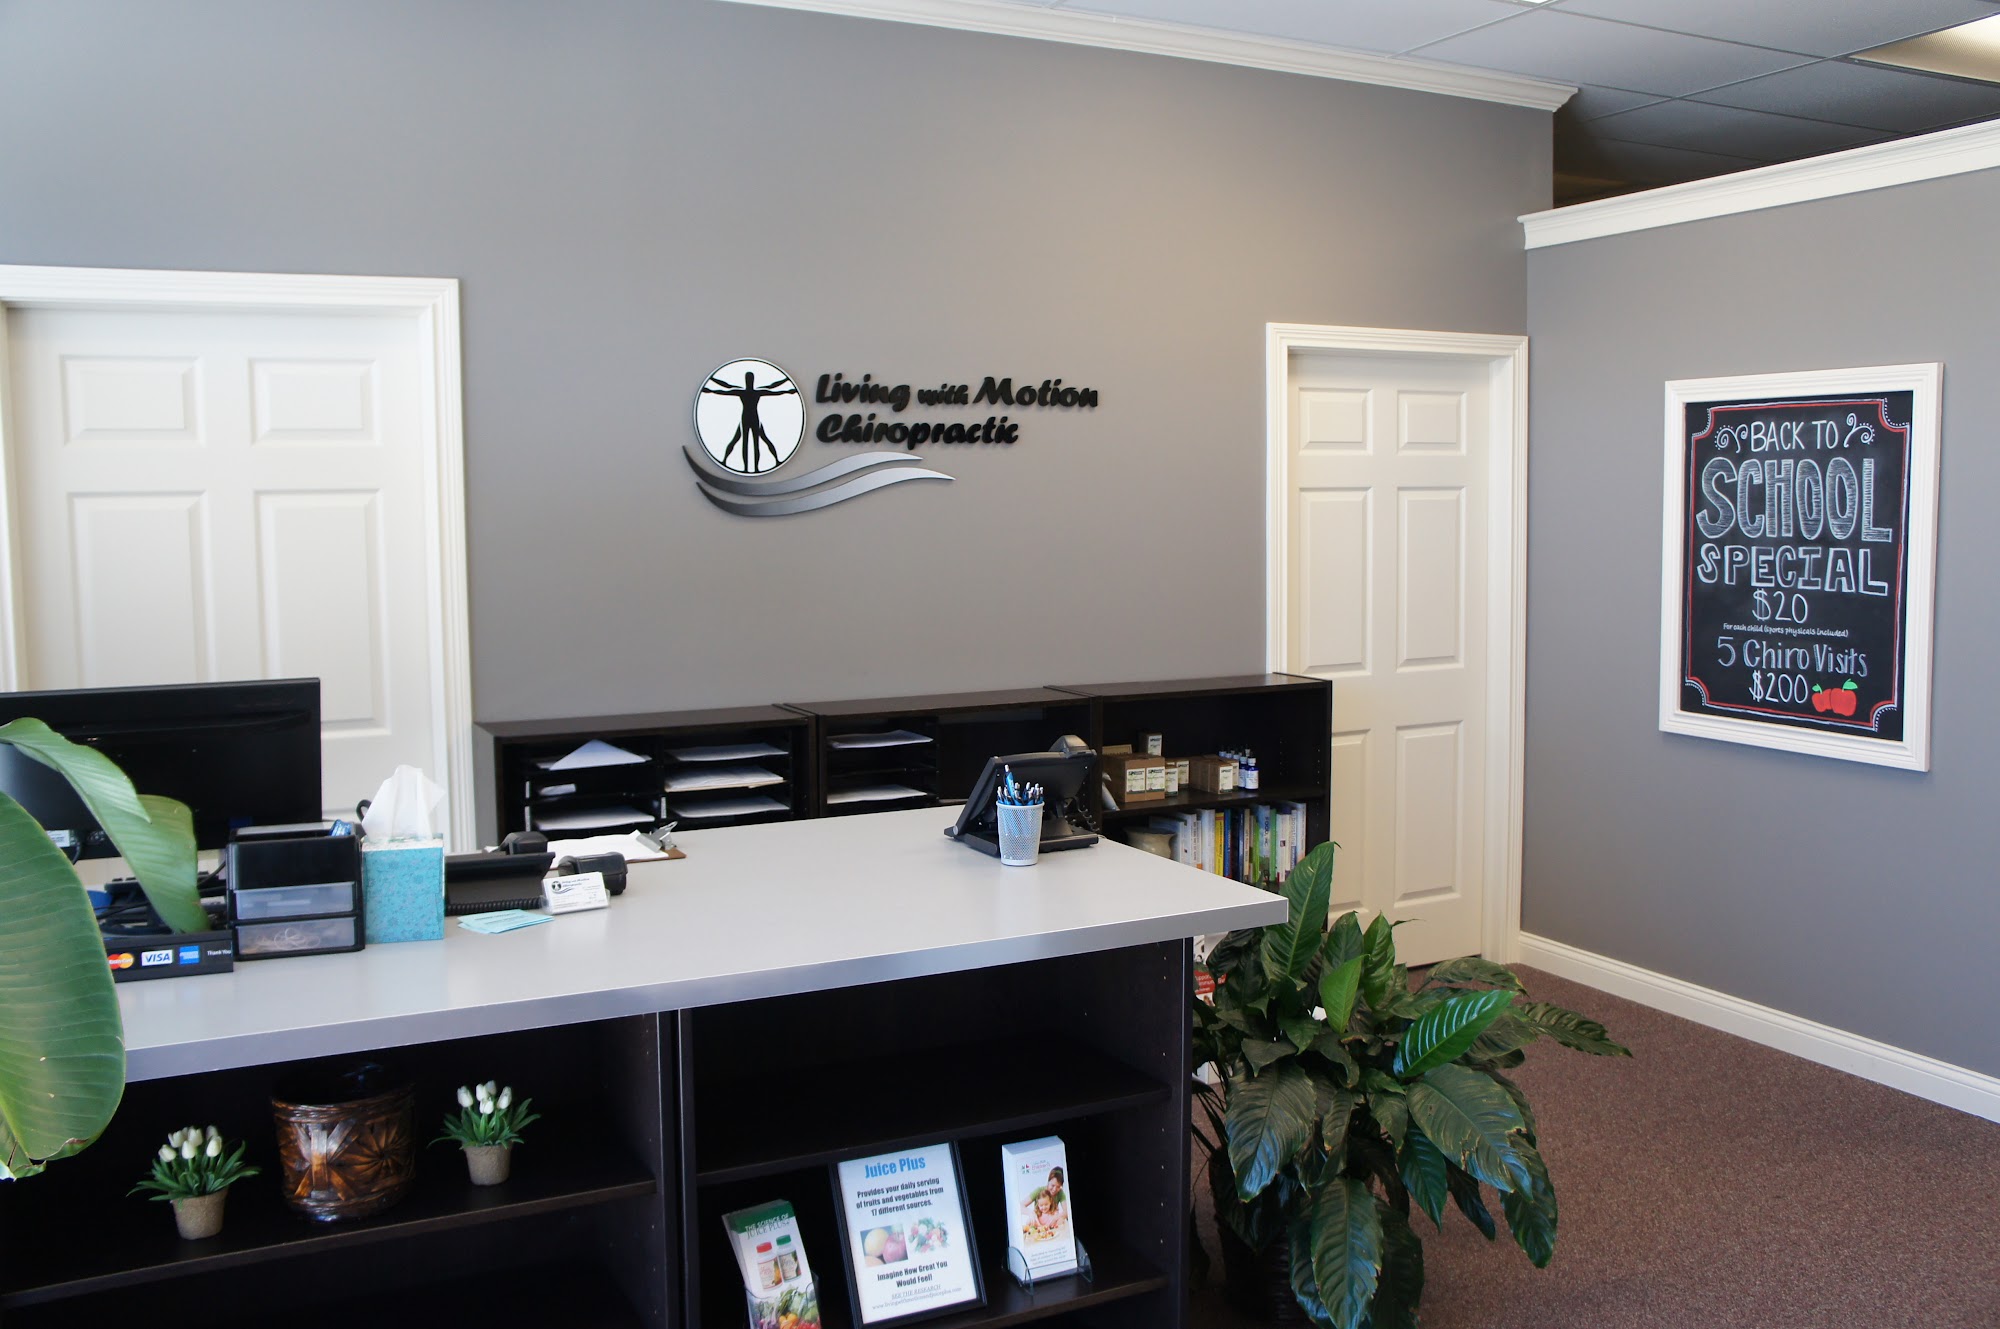 Living with Motion Chiropractic